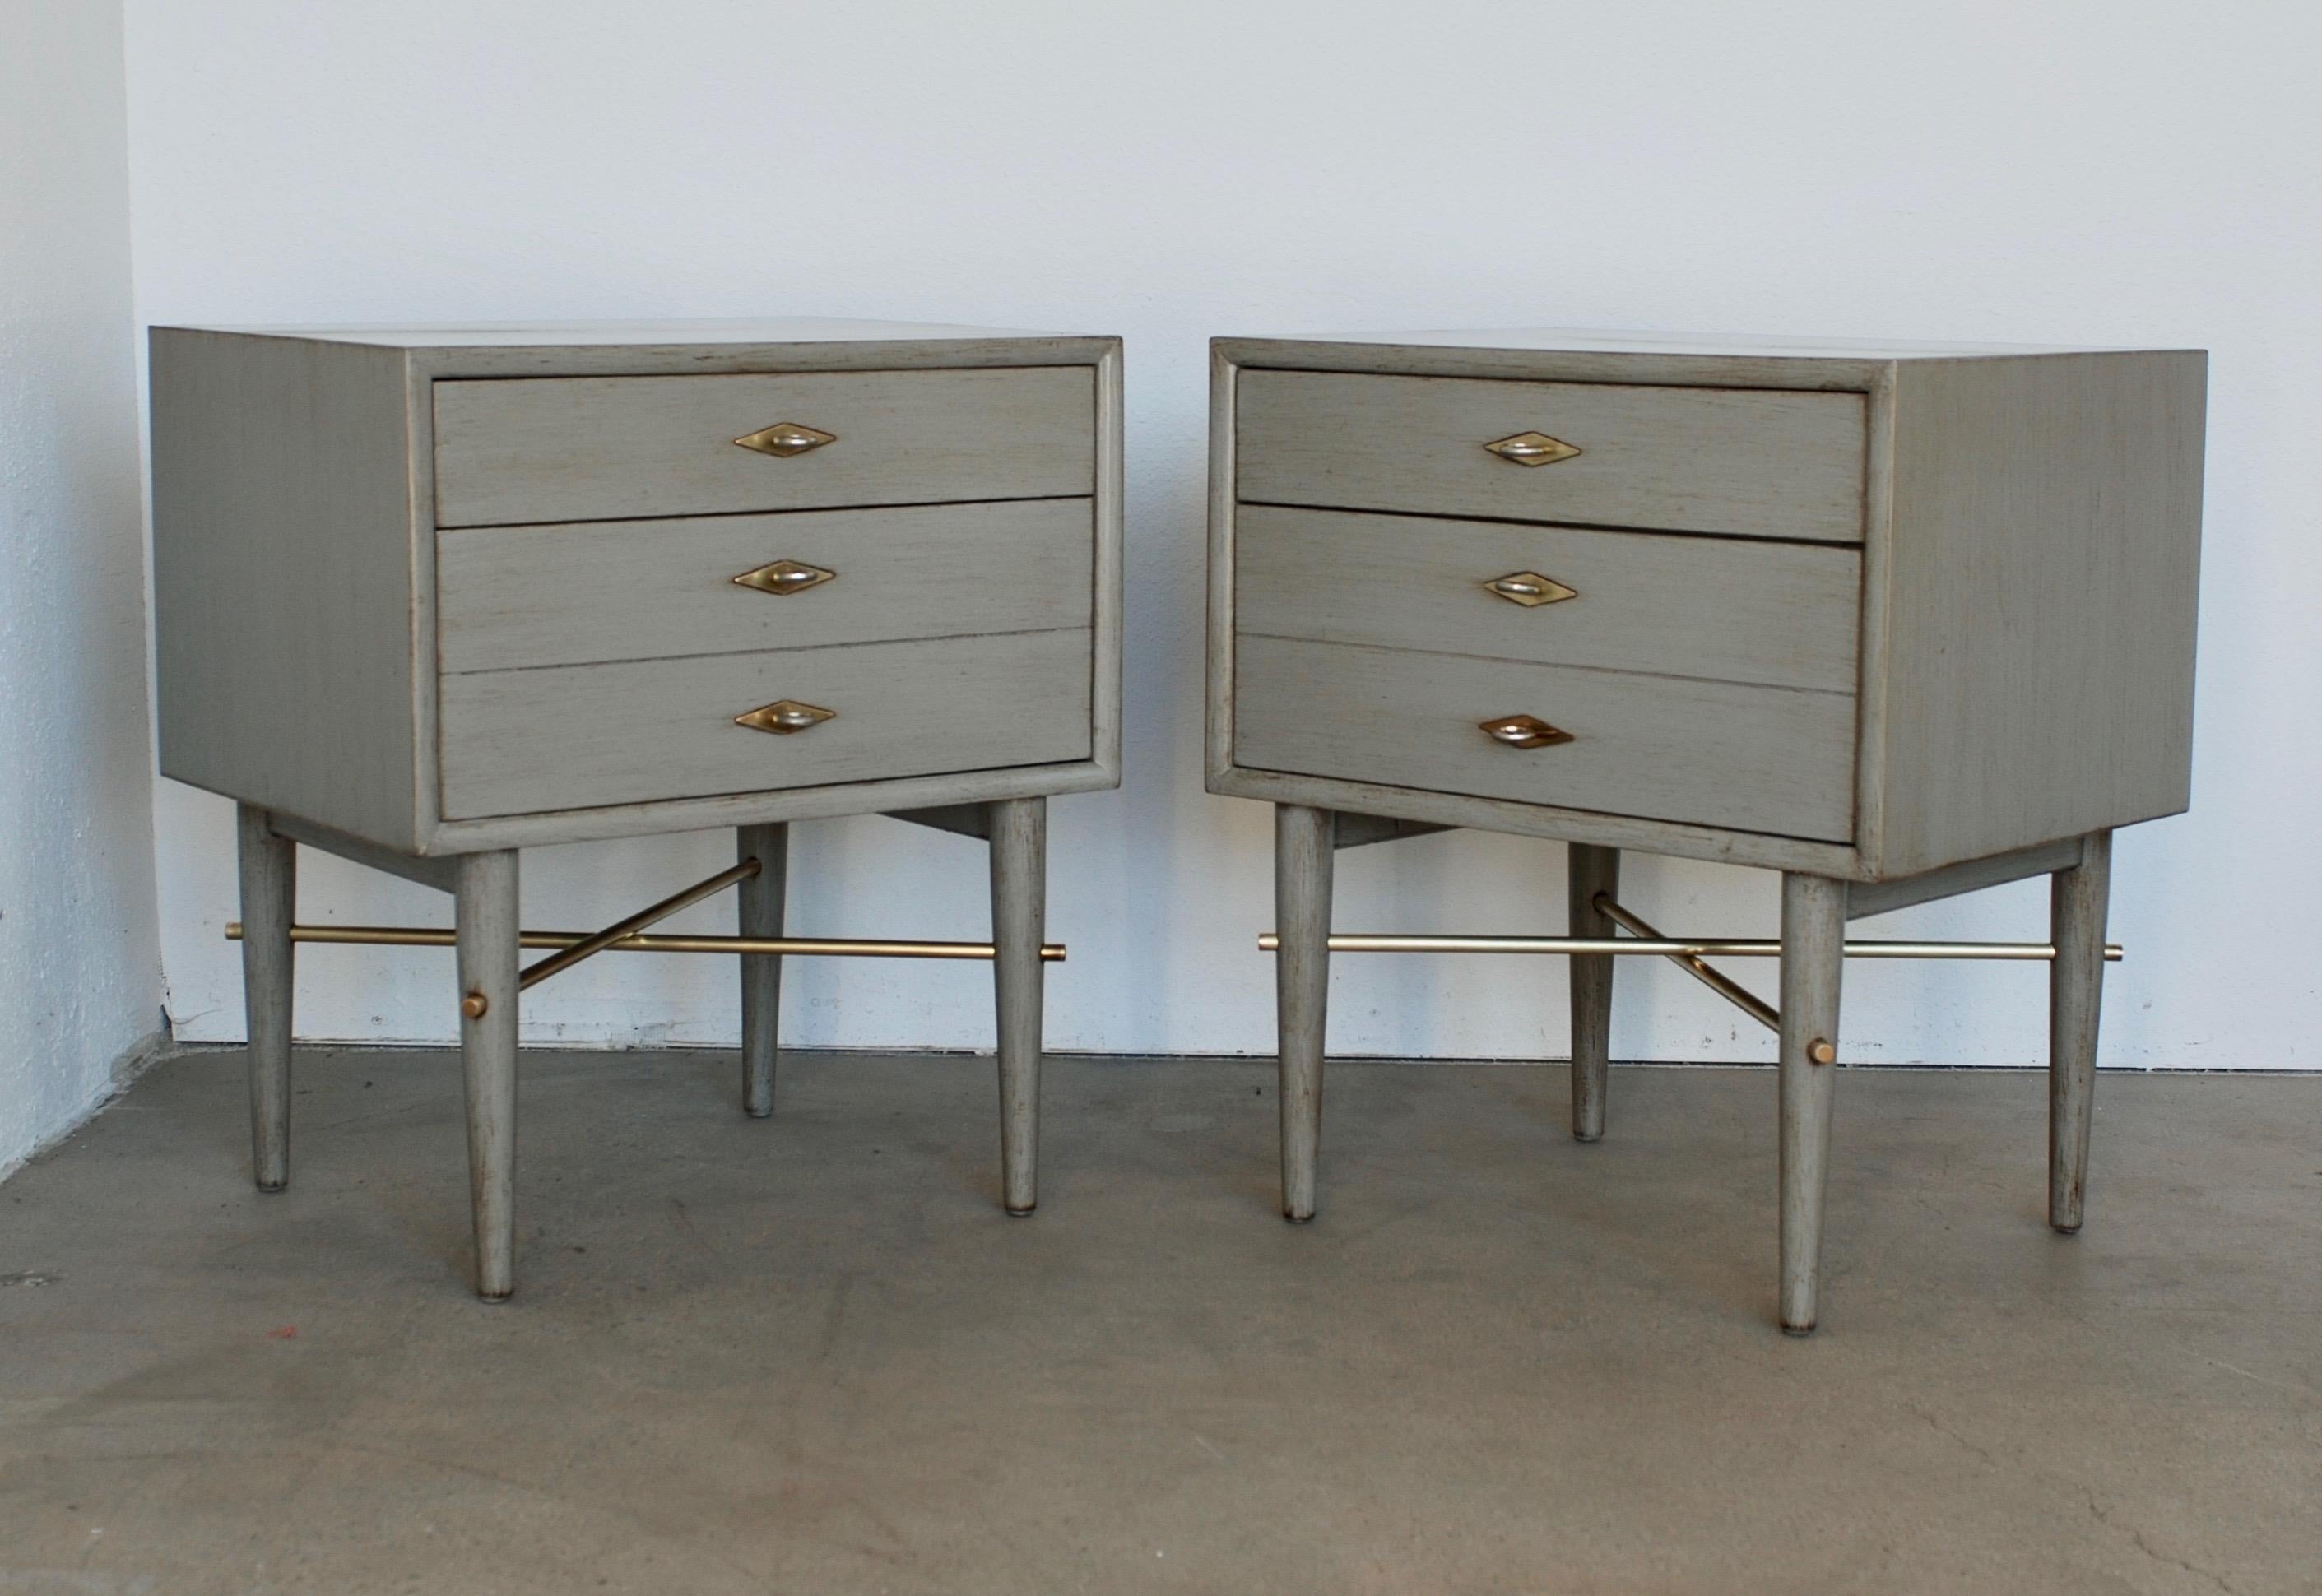 This pair of vintage American of Martinsville vintage nightstand have been refinished in a light grey with a dry brush finish to give the cabinets depth. There are brass cross bar fittings and brass backplates for the nickel colored hardware for a